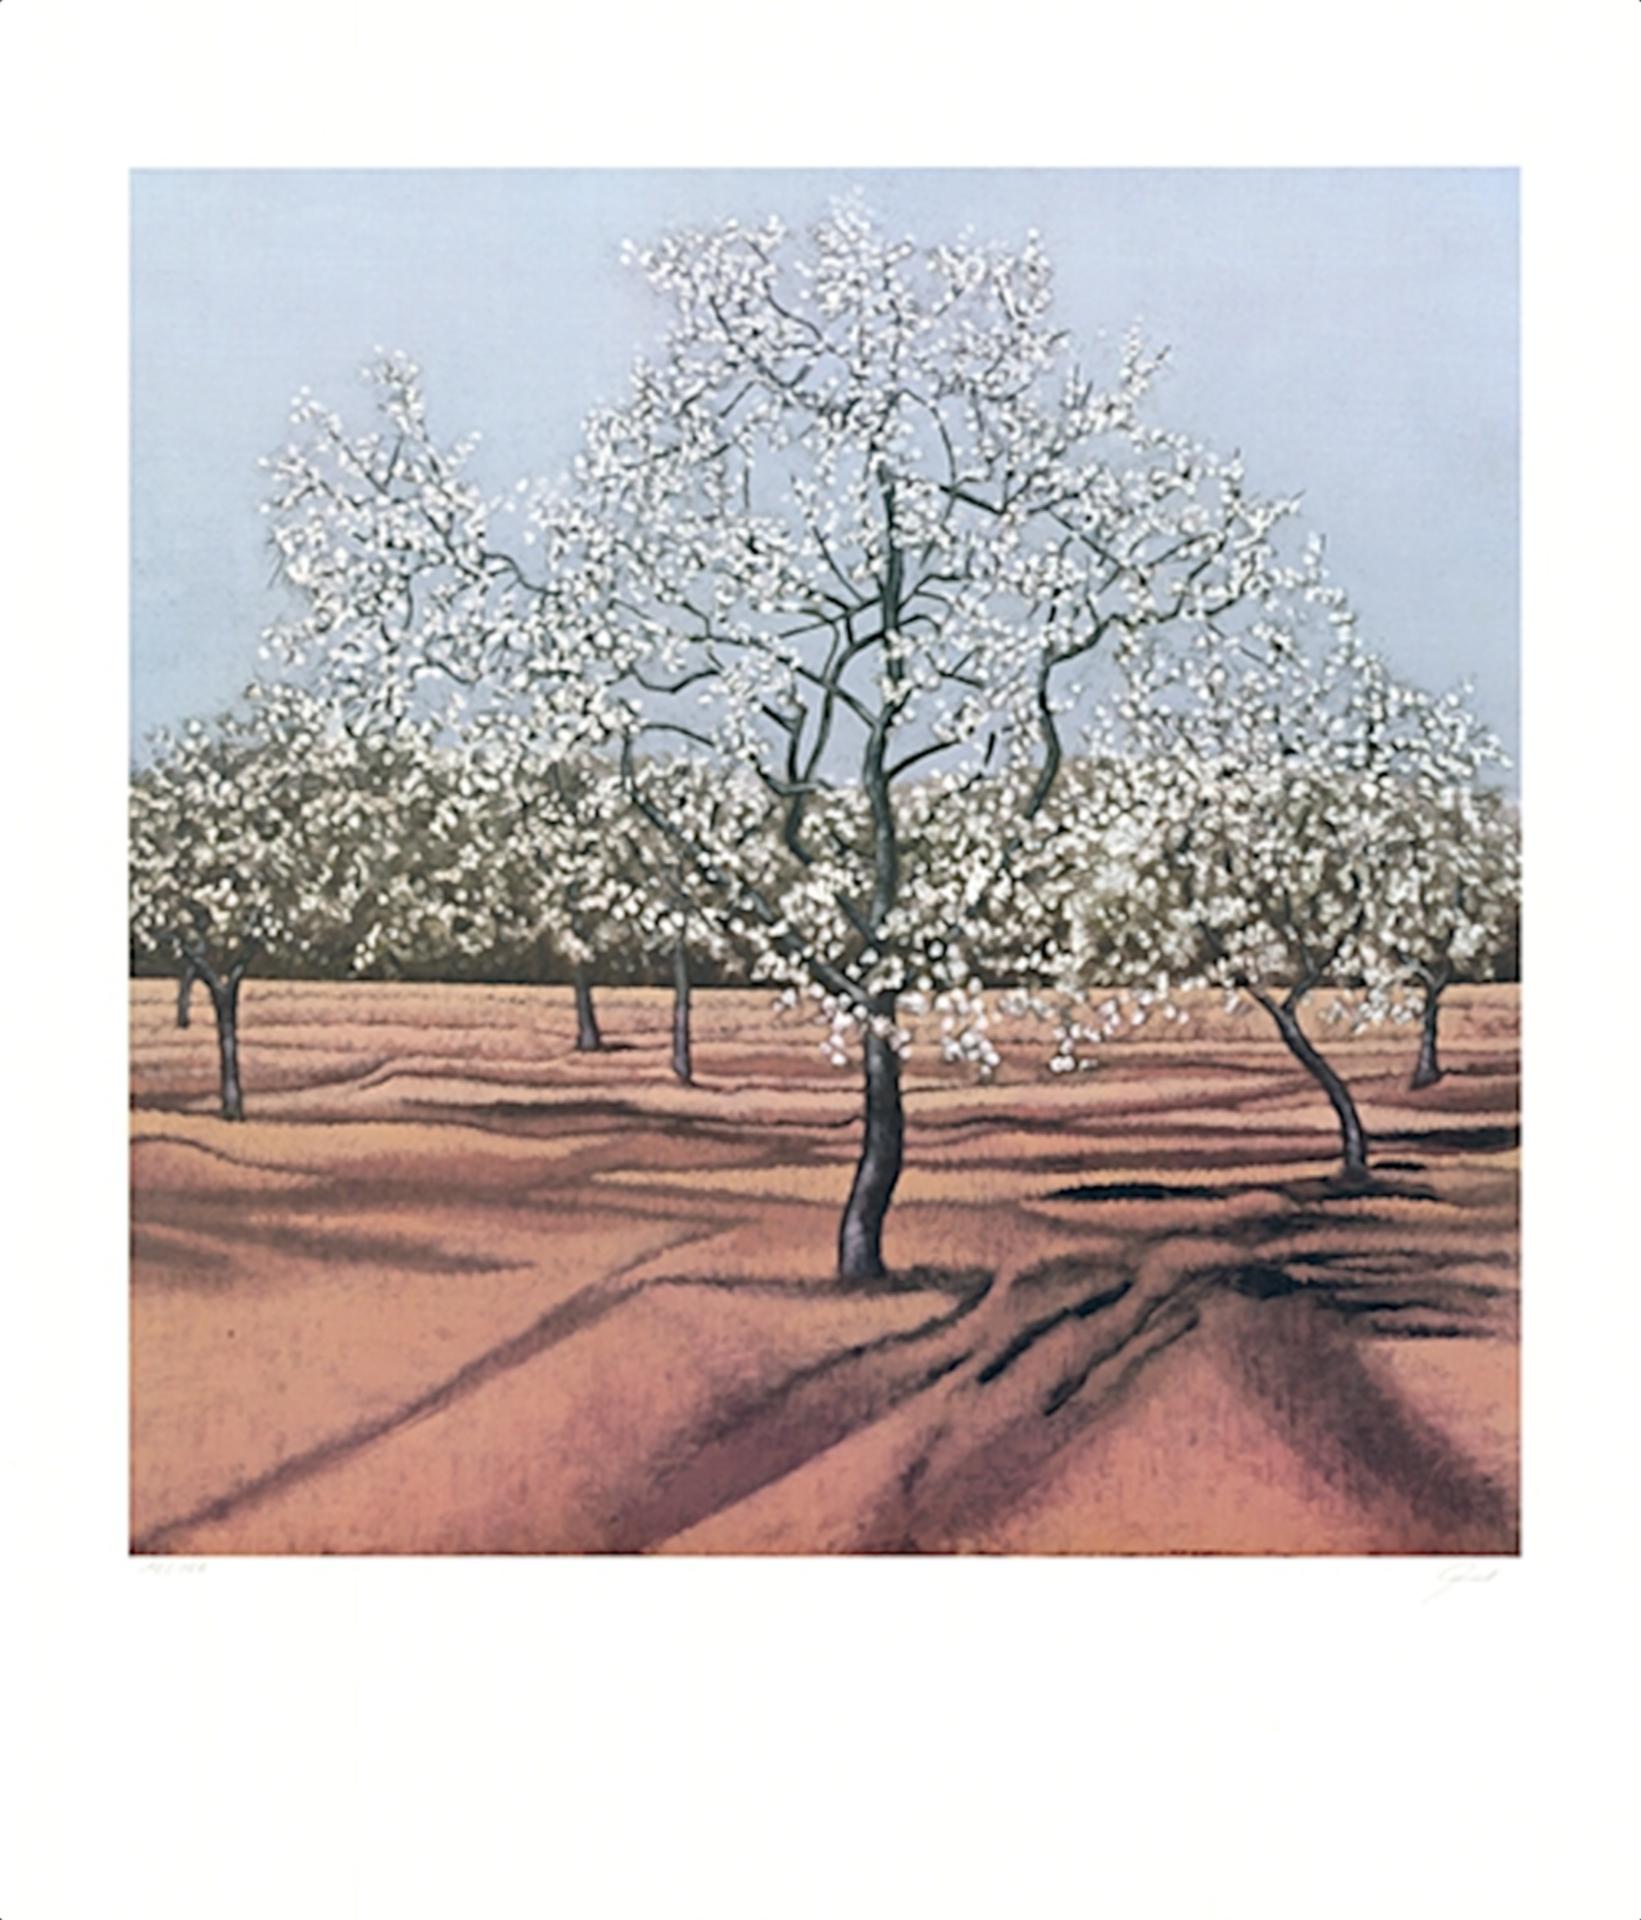 Gerhard Taubert - "Flowering Trees" - color offset lithograph